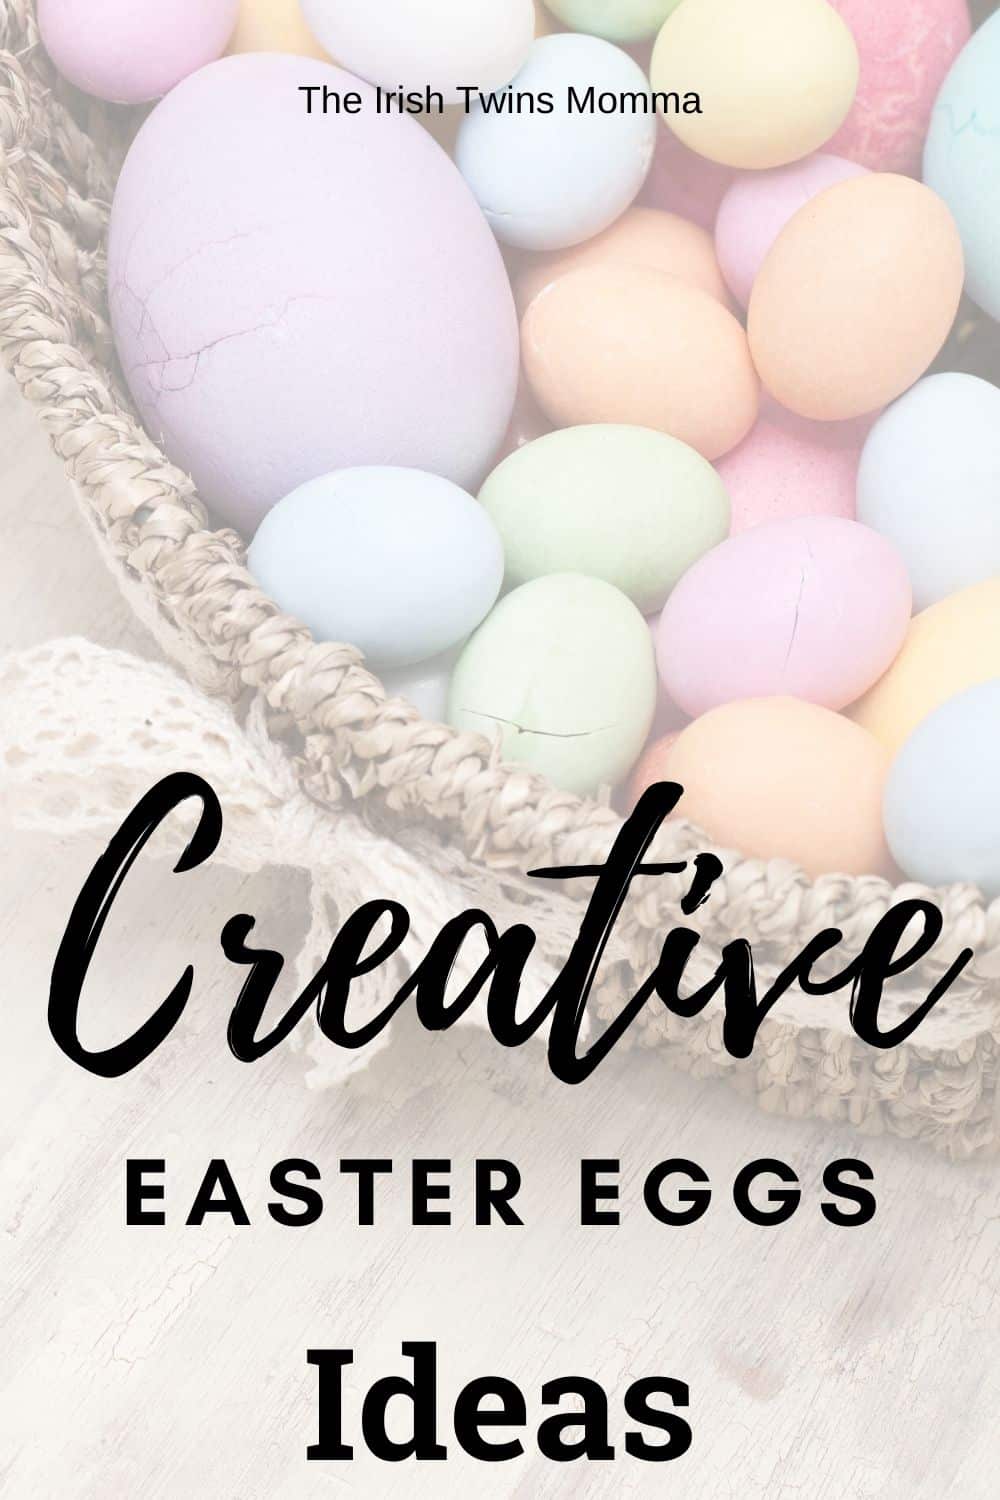 Be creative this year and try something new when dying Easter eggs that will make beautiful art that you can display for others to see. via @irishtwinsmom11